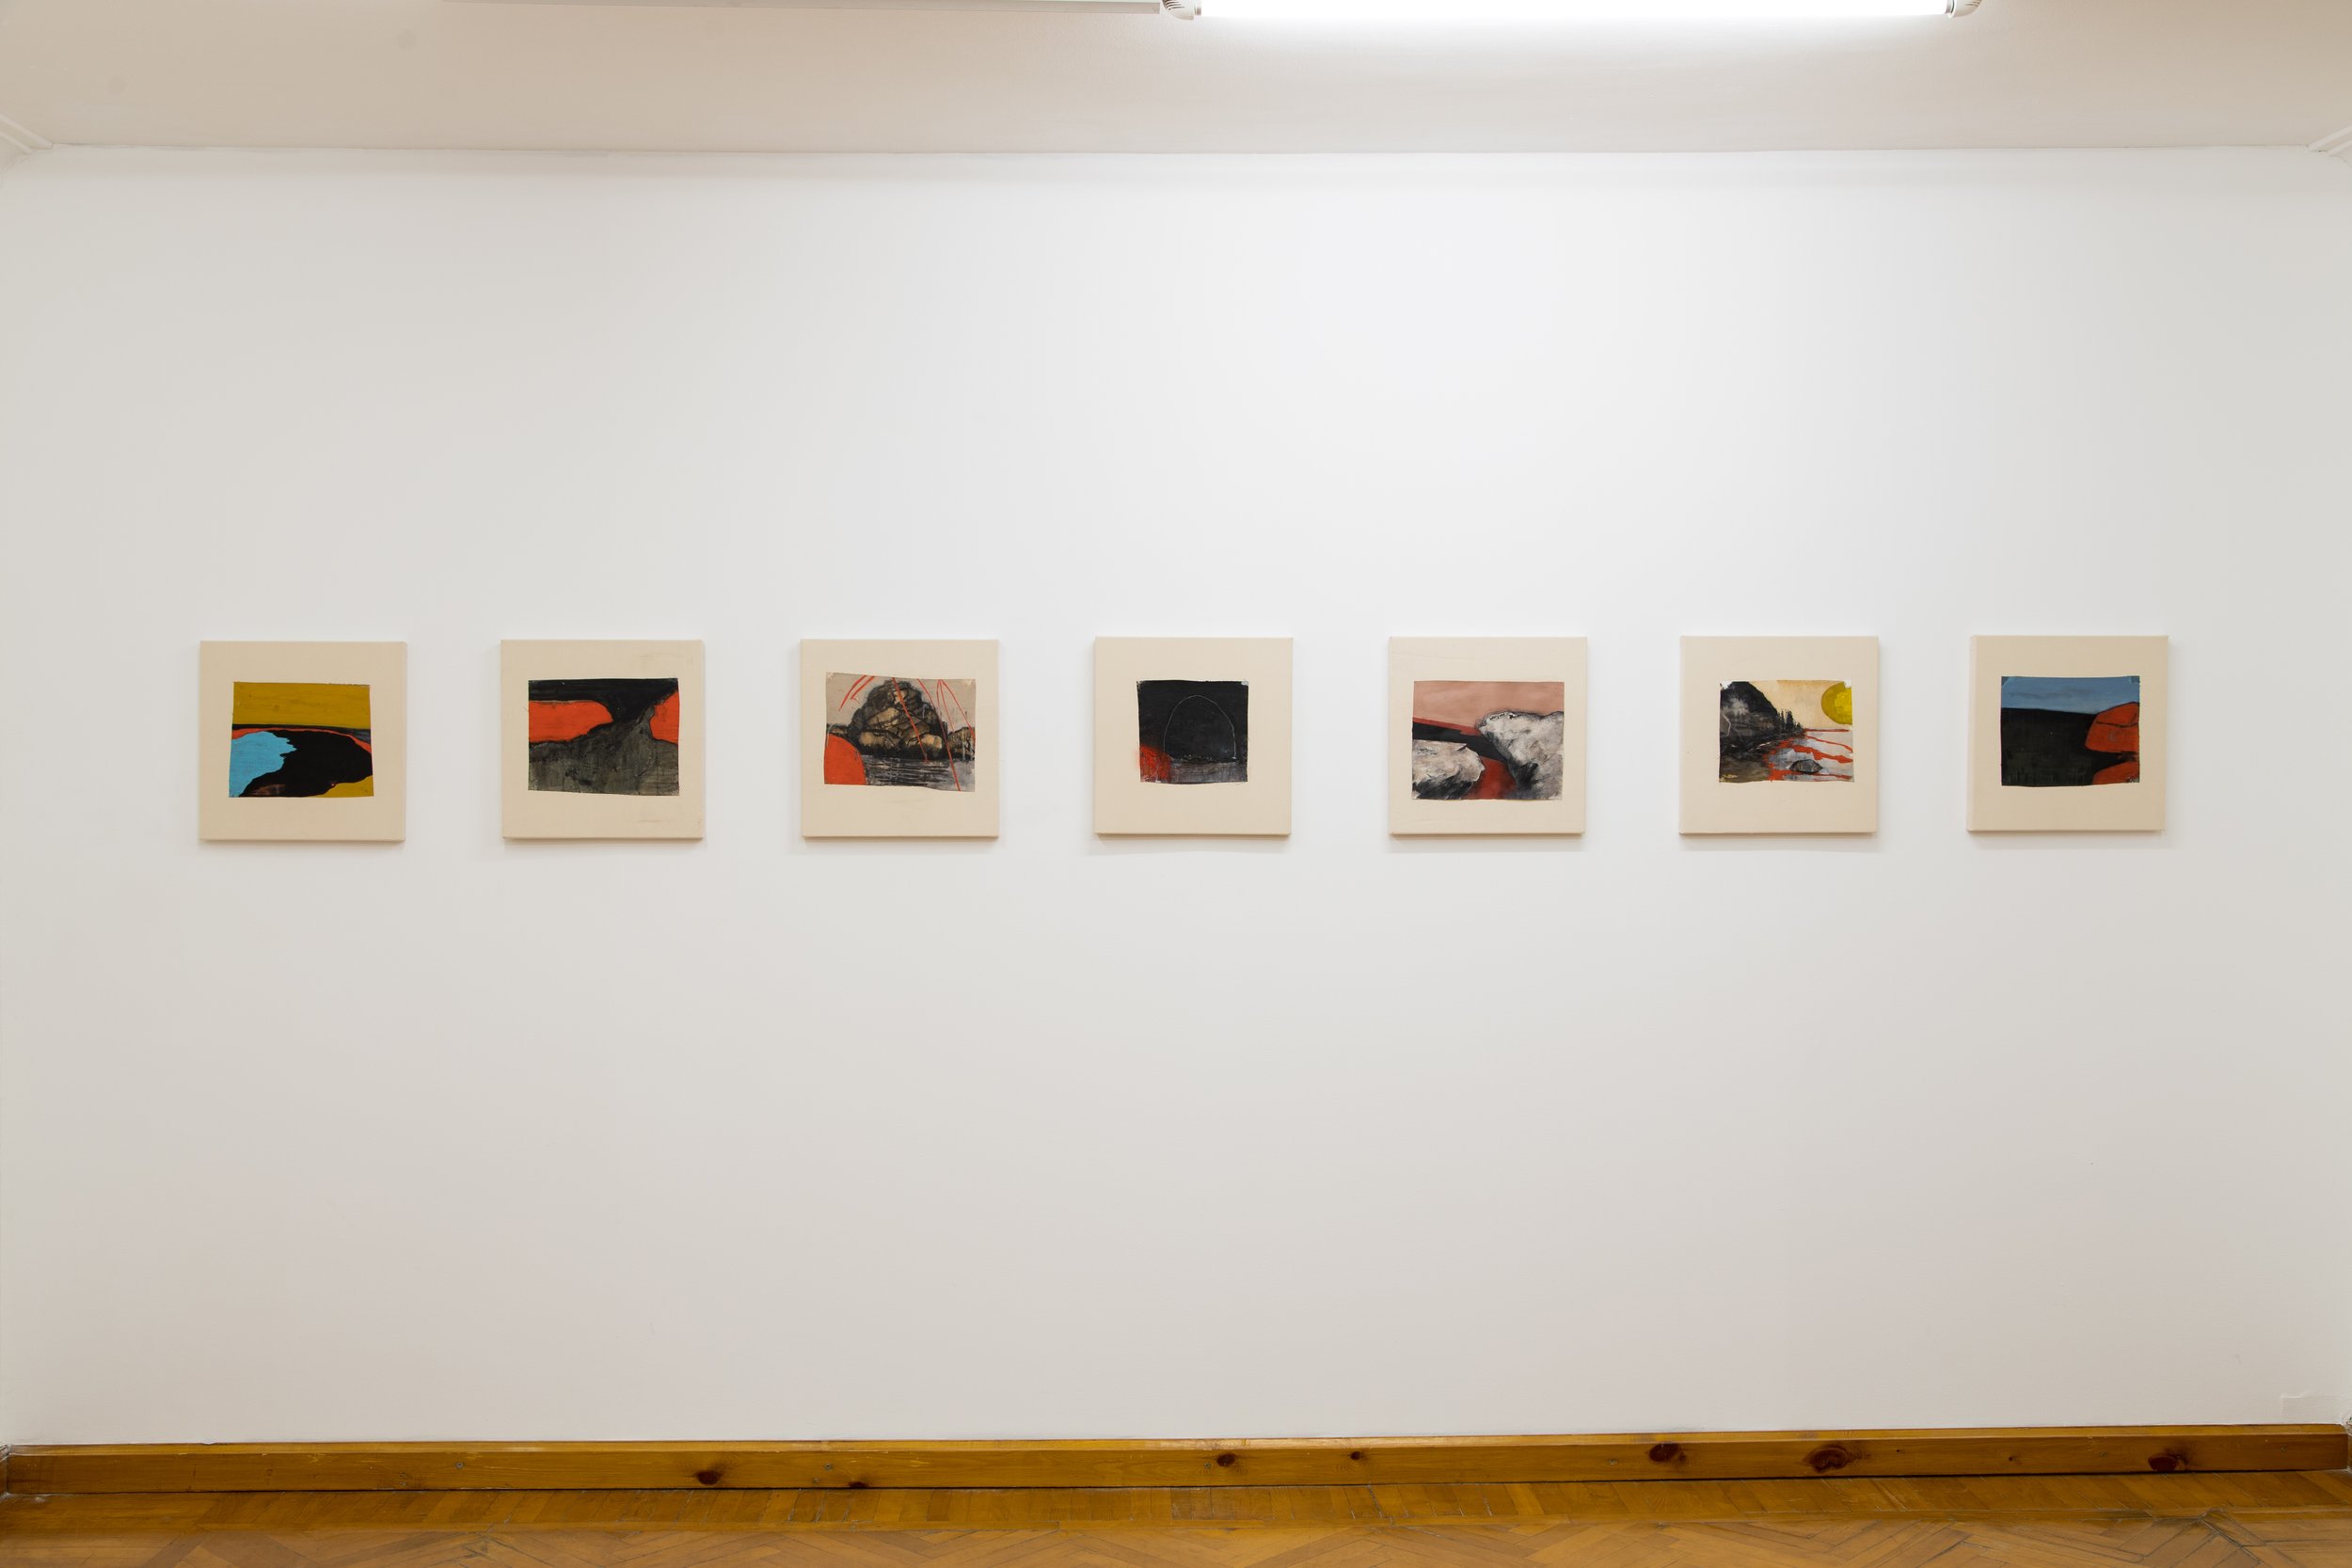  Installation view - The Cheating Hand of Randomness (2021). Ten small-scale acrylic on canvas paintings. 25 x 21 cm each  (41 x 41 cm with frame).    